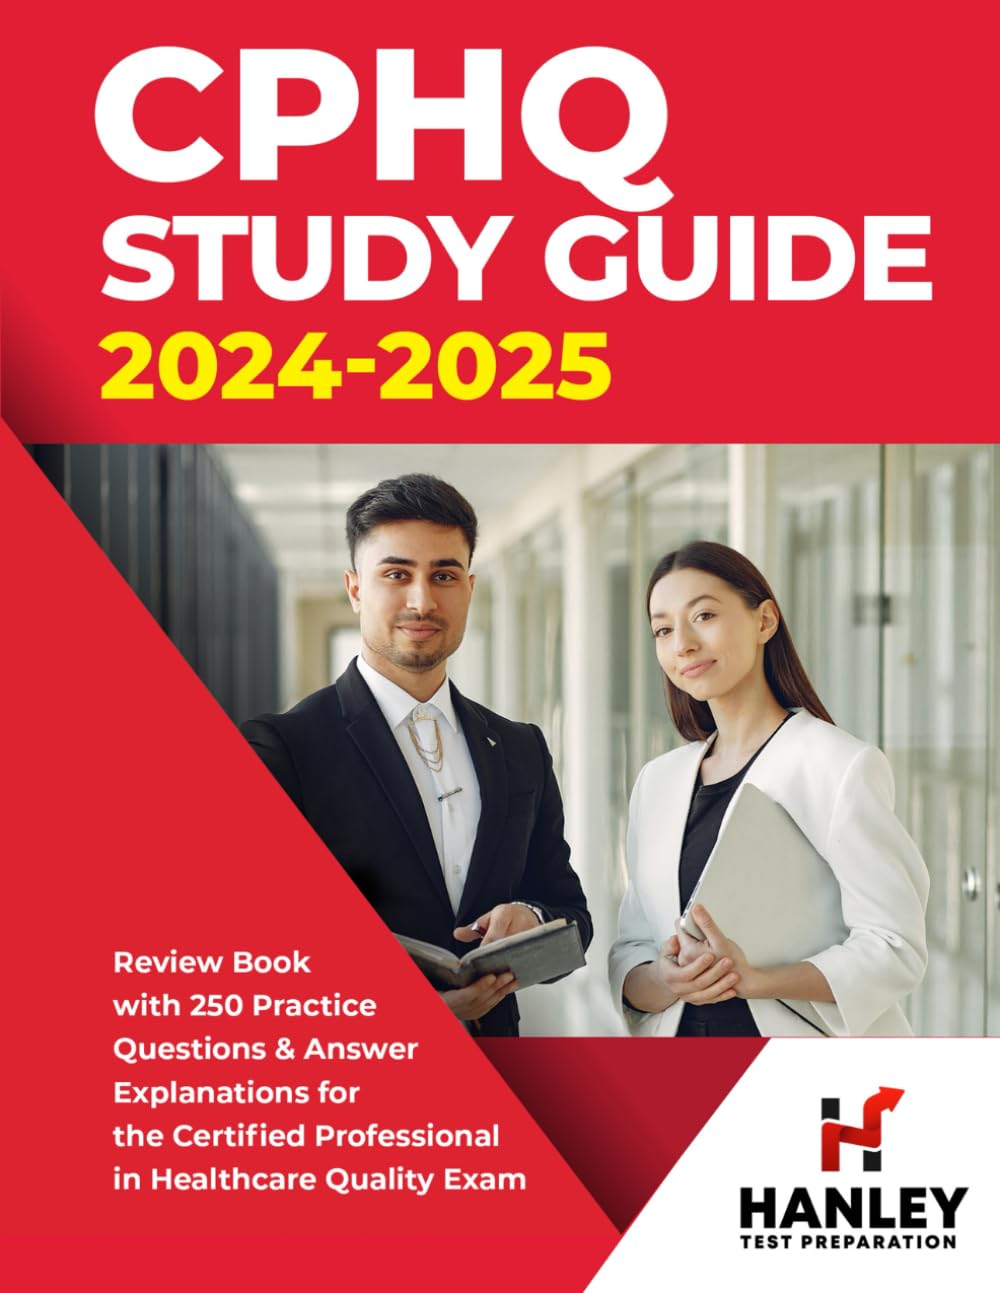 CPHQ Study Guide 2024-2025: Review Book with 250 Practice Questions and Answer Explanations for the Certified Professional in Healthcare Quality Exam